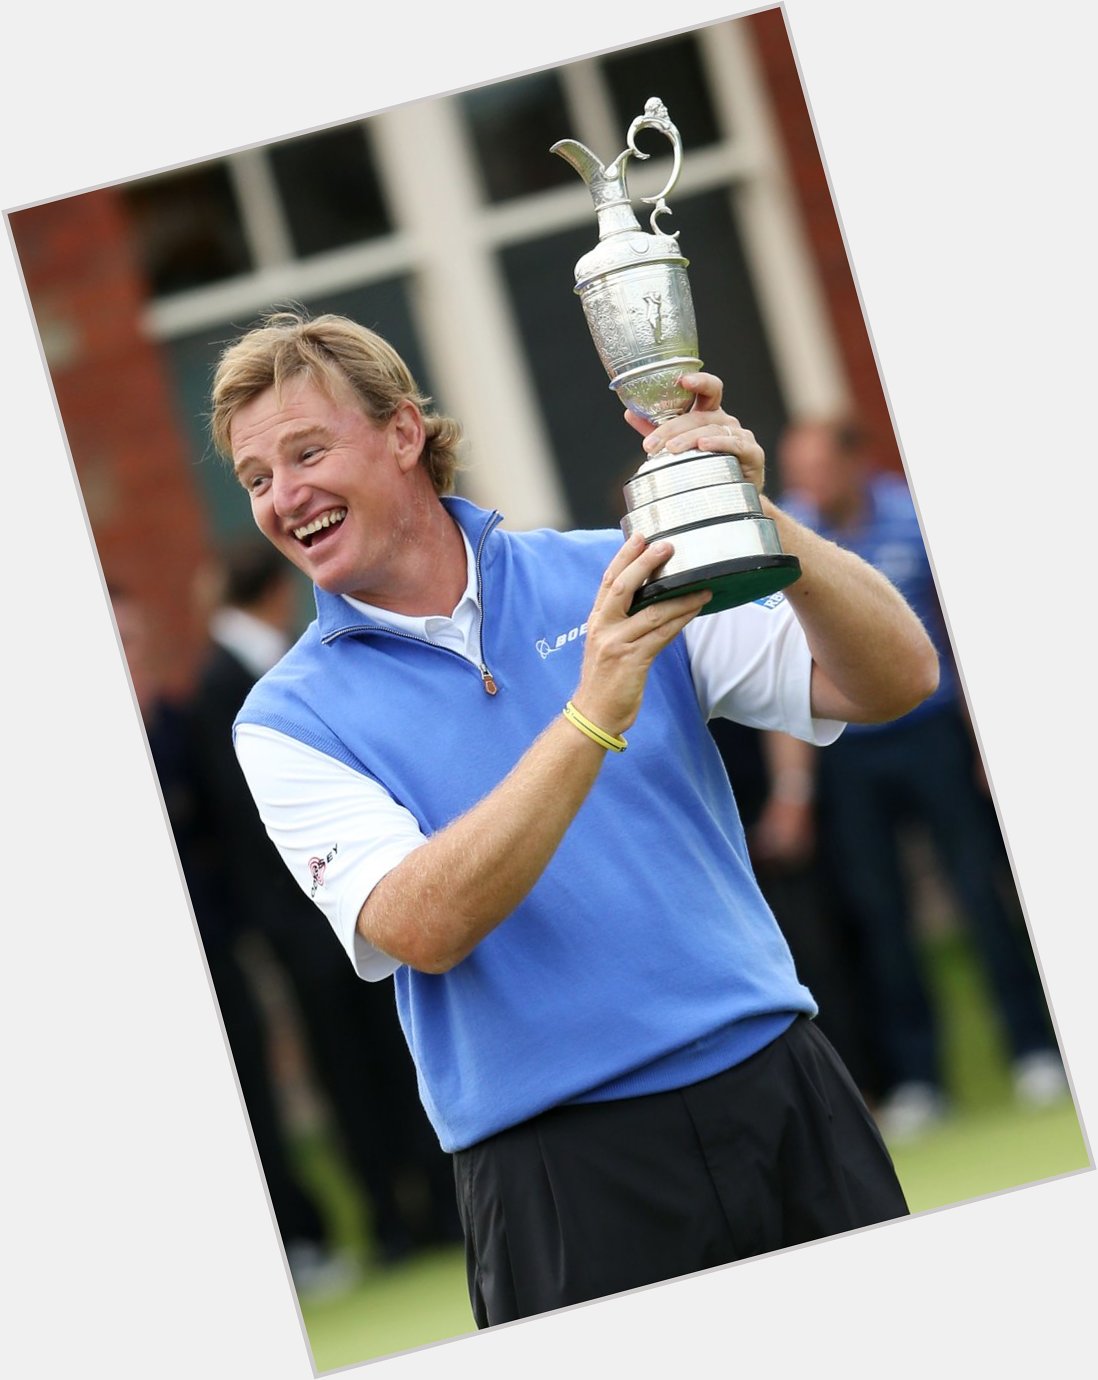 HAPPY BIRTHDAY! Three cheers to Ernie Els, who turns 48 today! 